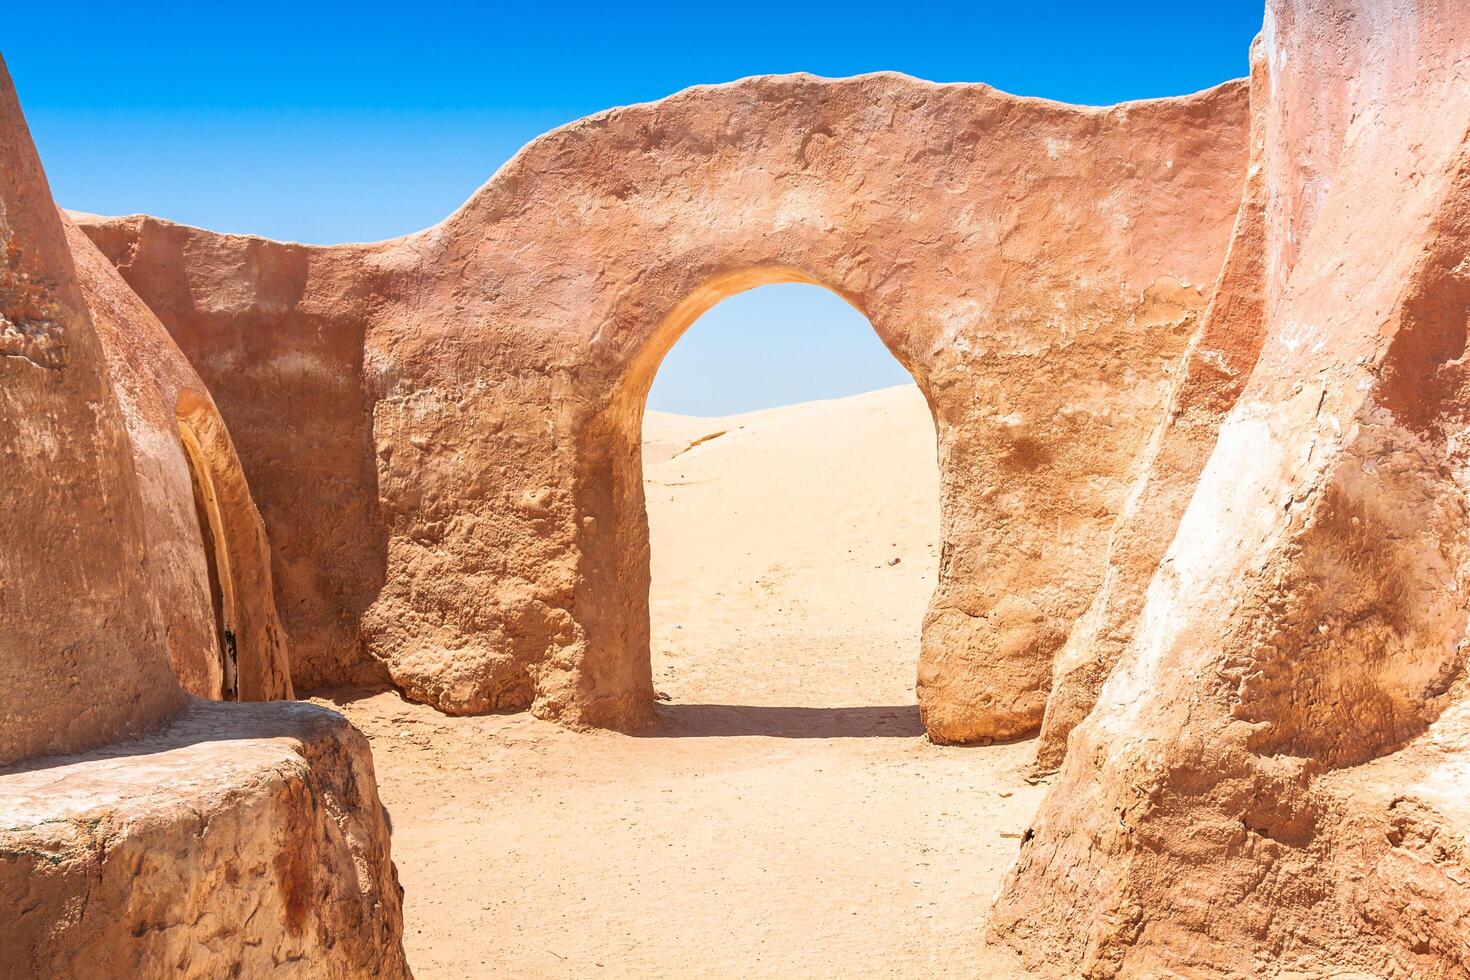 Set for the Star Wars movie still stands in the Tunisian desert near Tozeur. photo